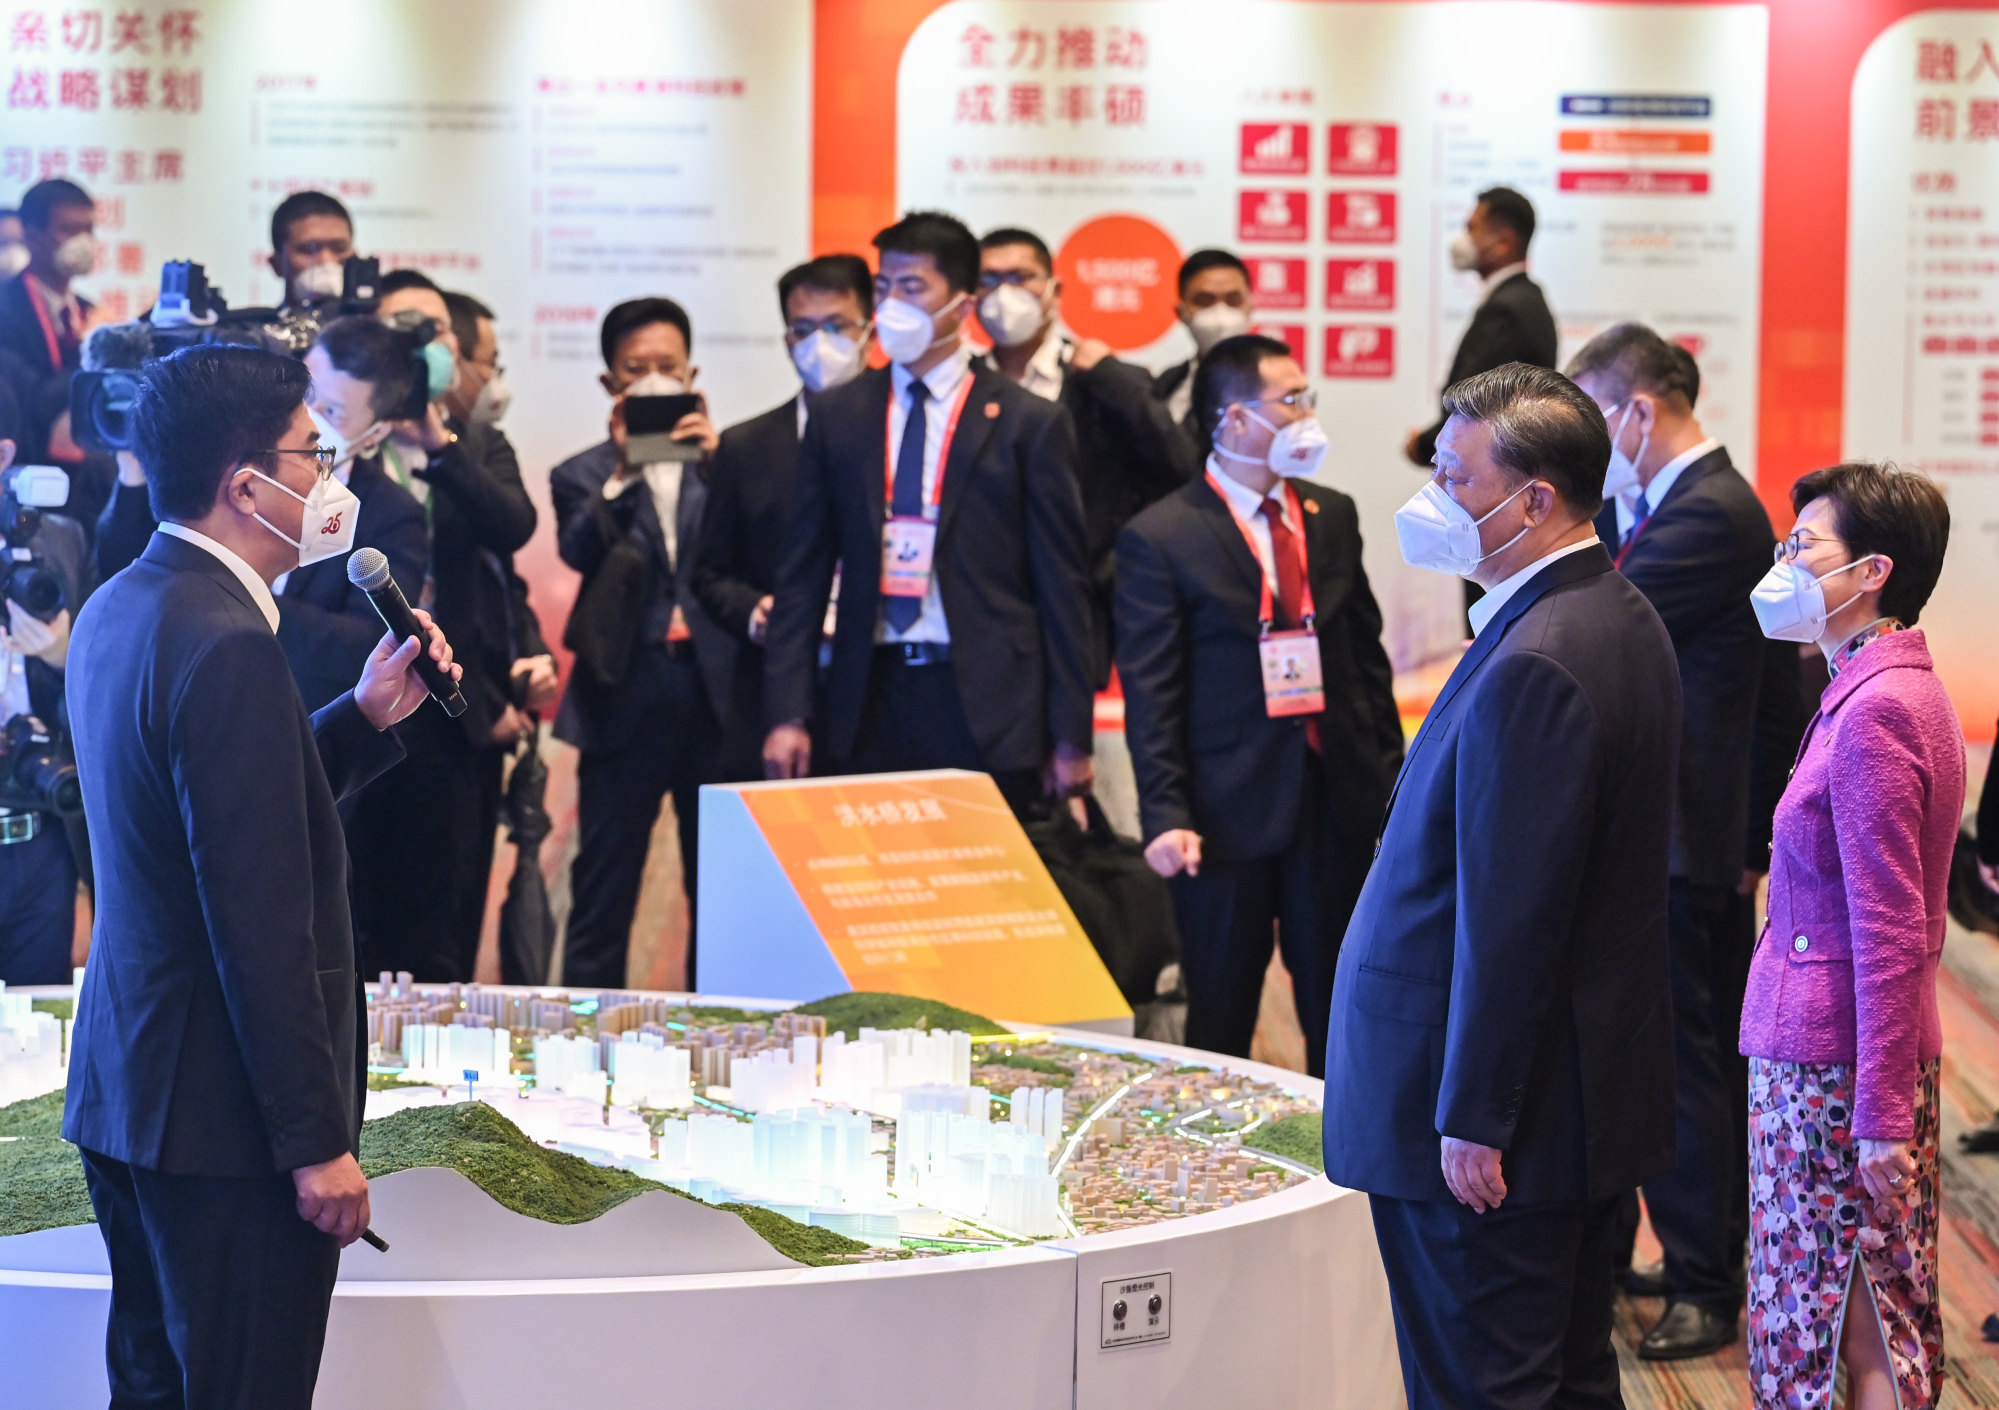 Government minister Michael Wong (left) briefs the president on a new development area. Photo: Handout